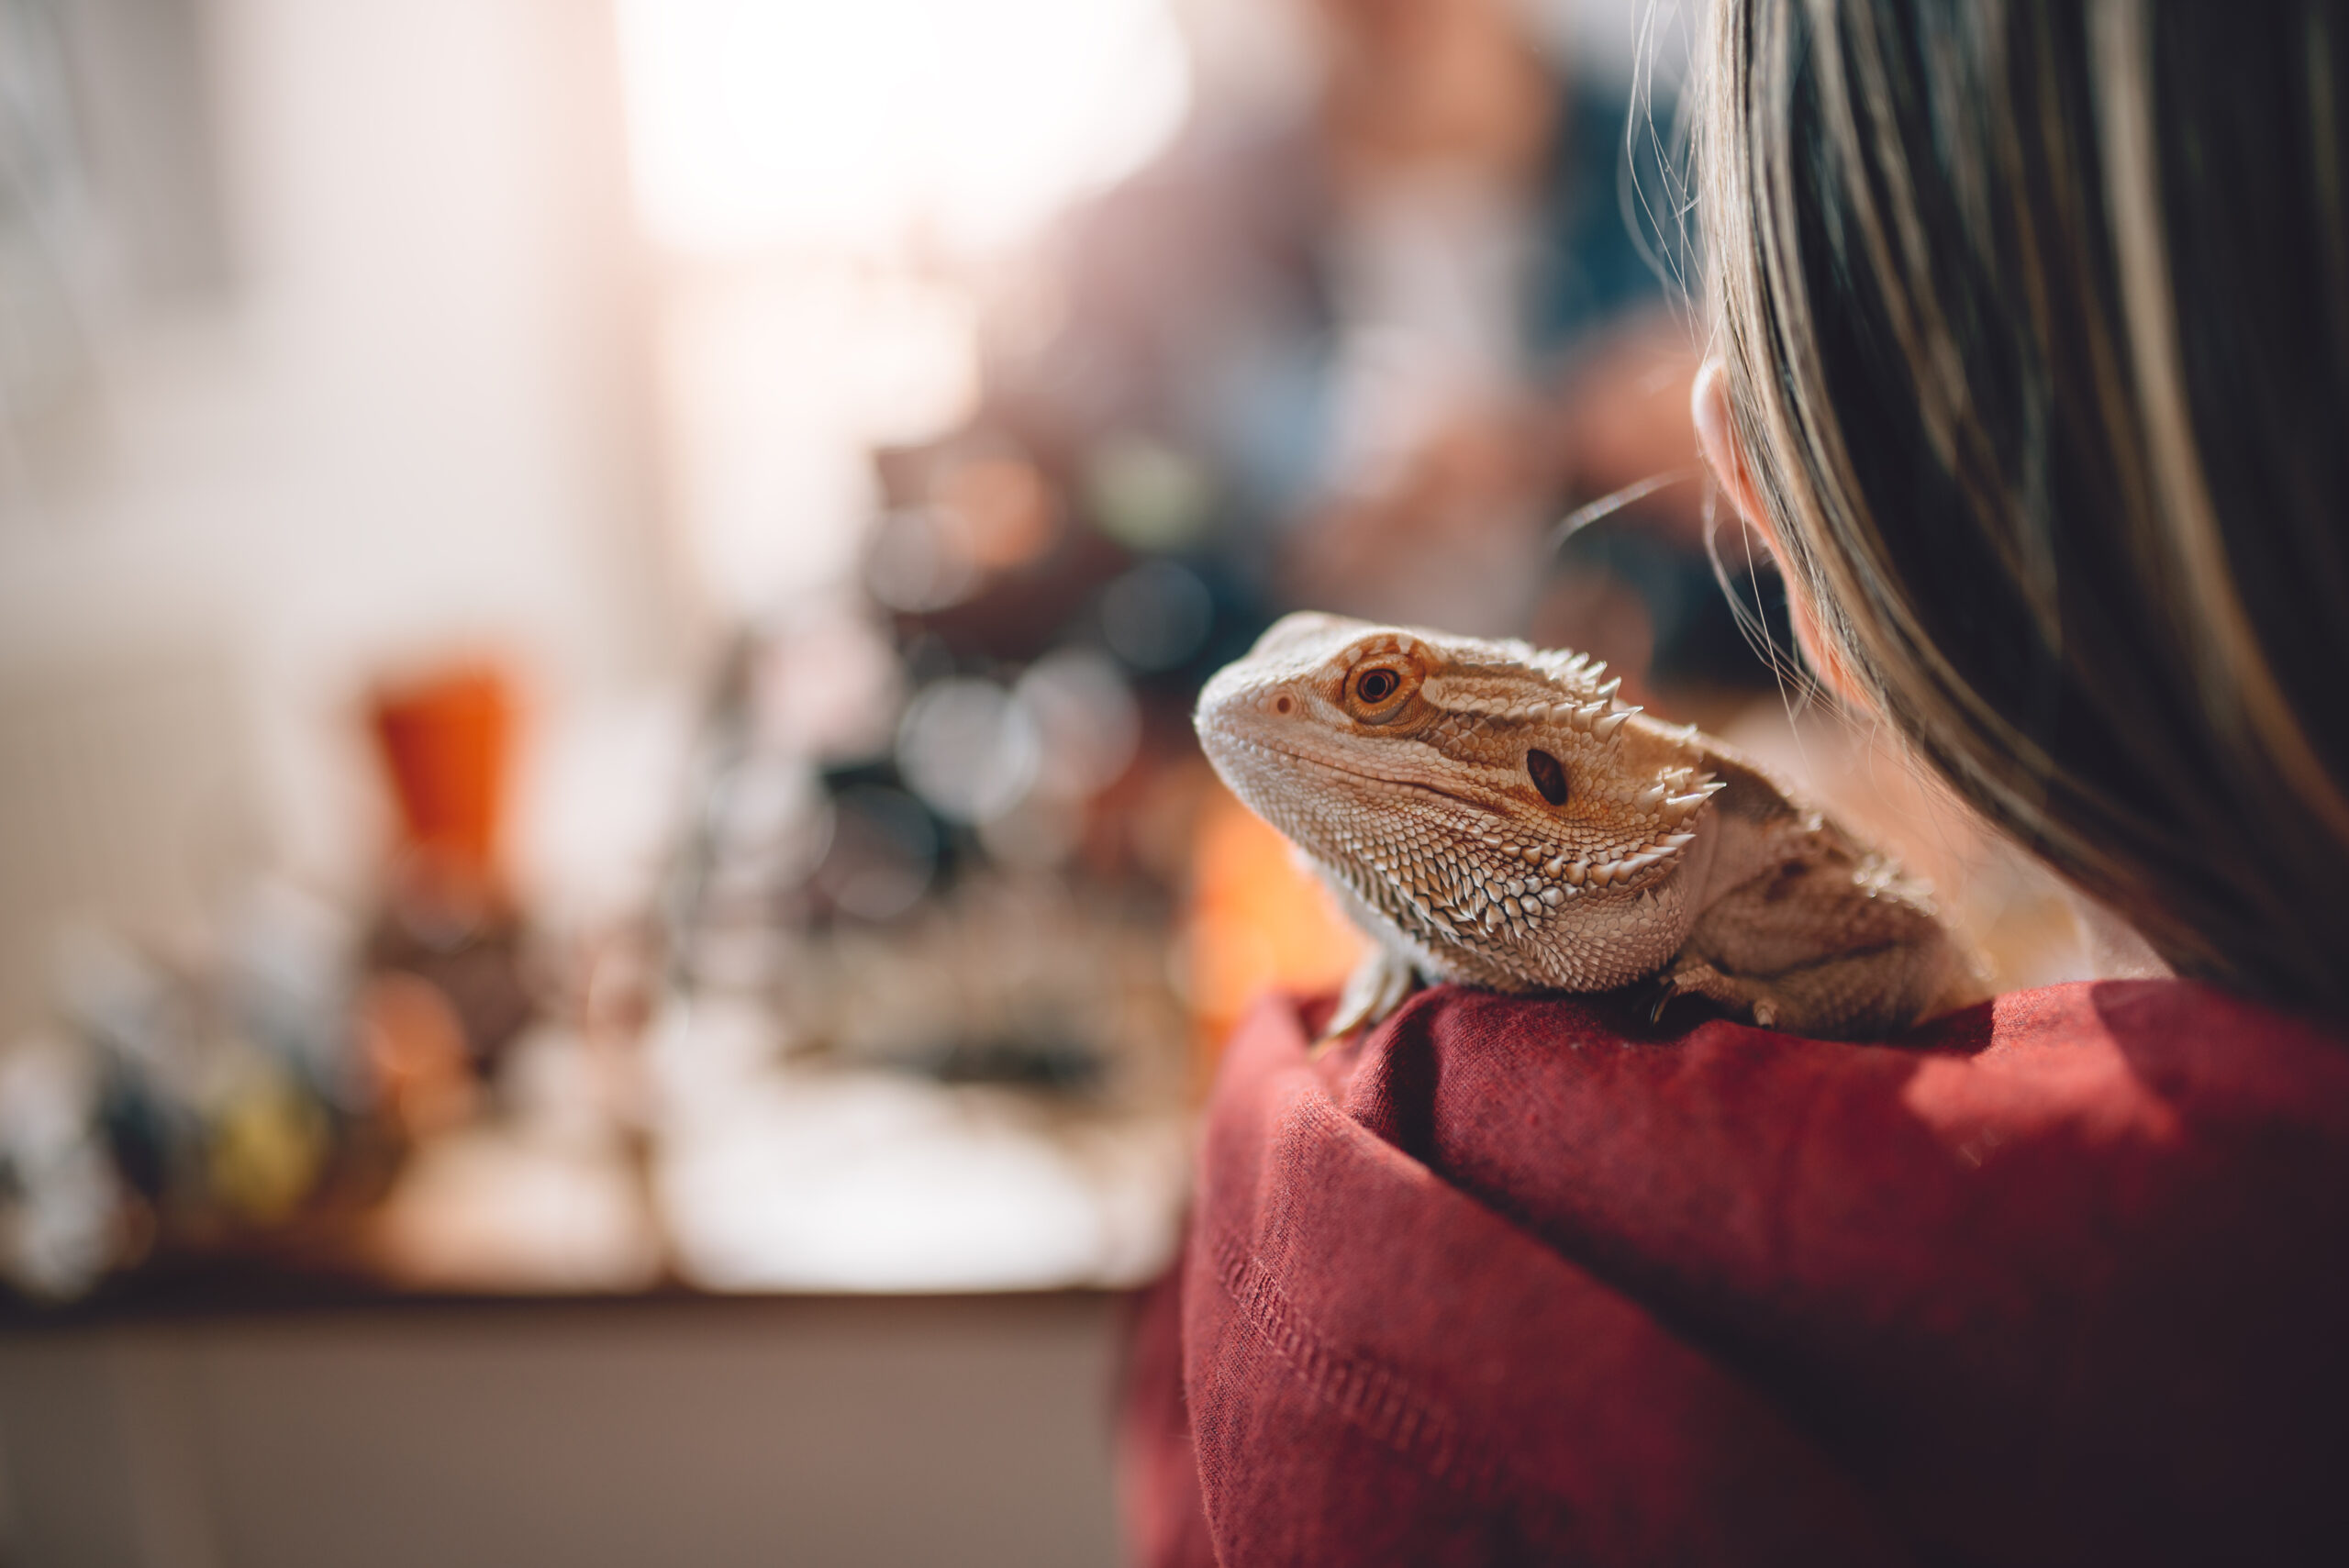 As a general guideline, it's recommended to schedule an annual checkup for an adult lizard, considering it's age, species, and overall health.